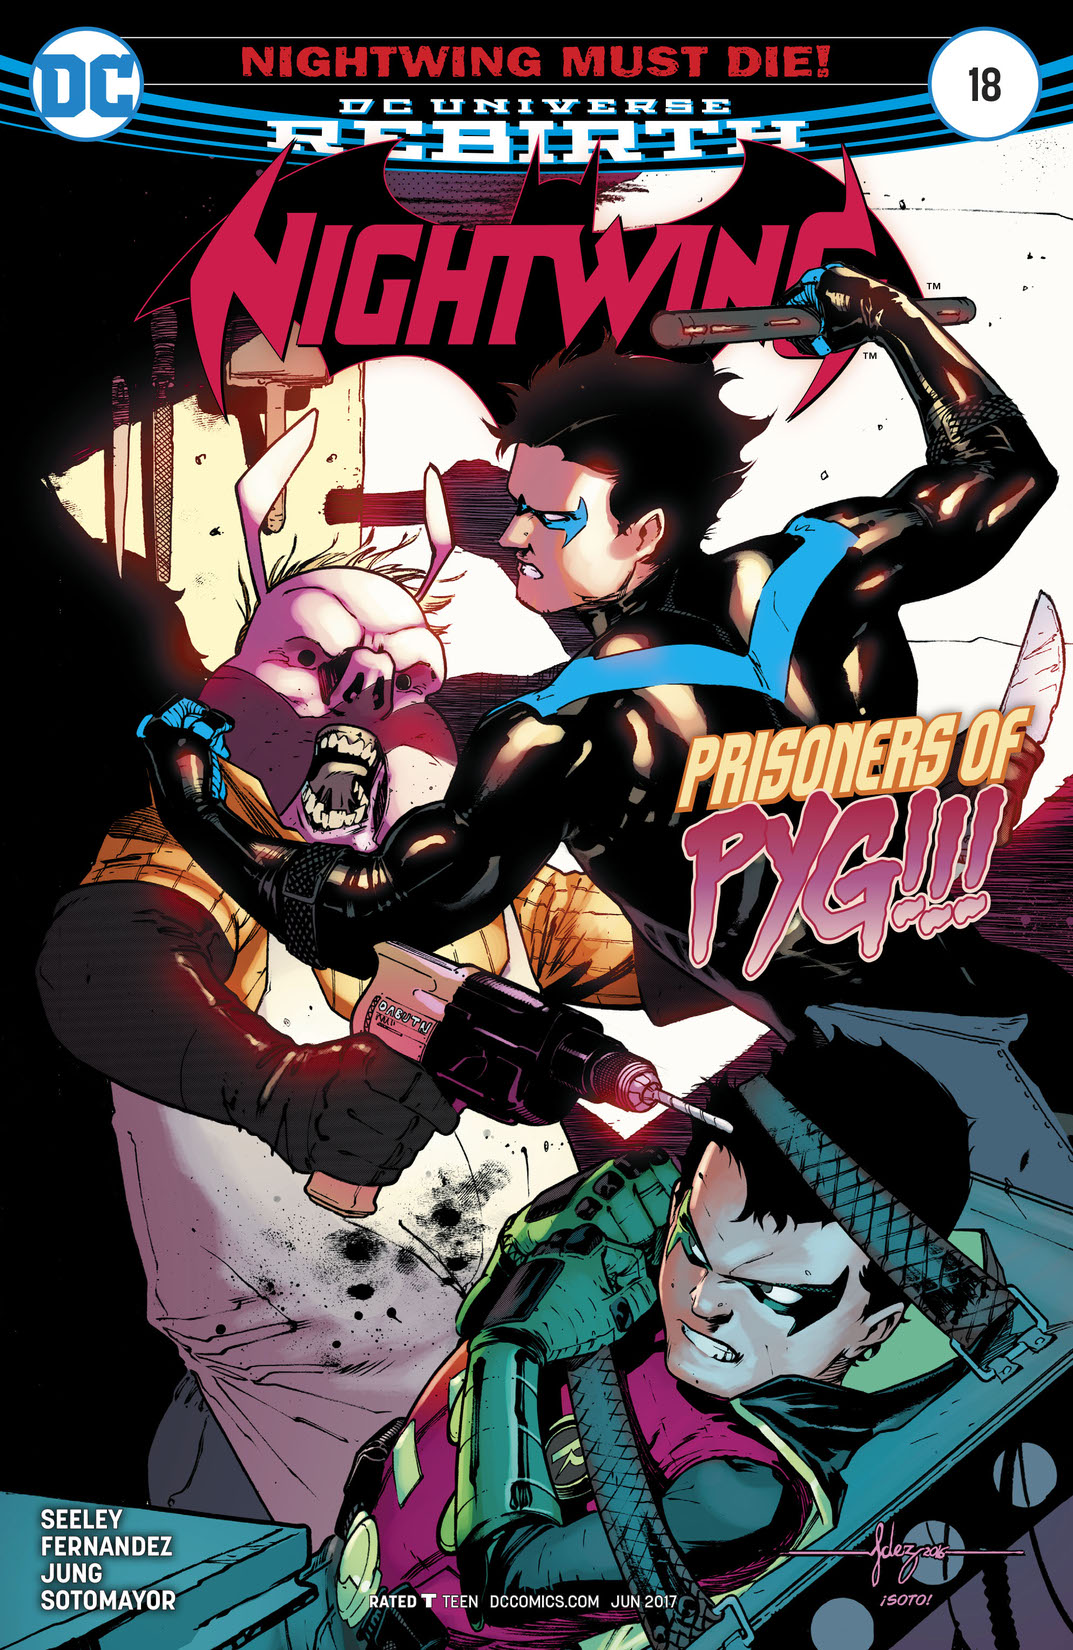 Nightwing (2016-) #18 preview images